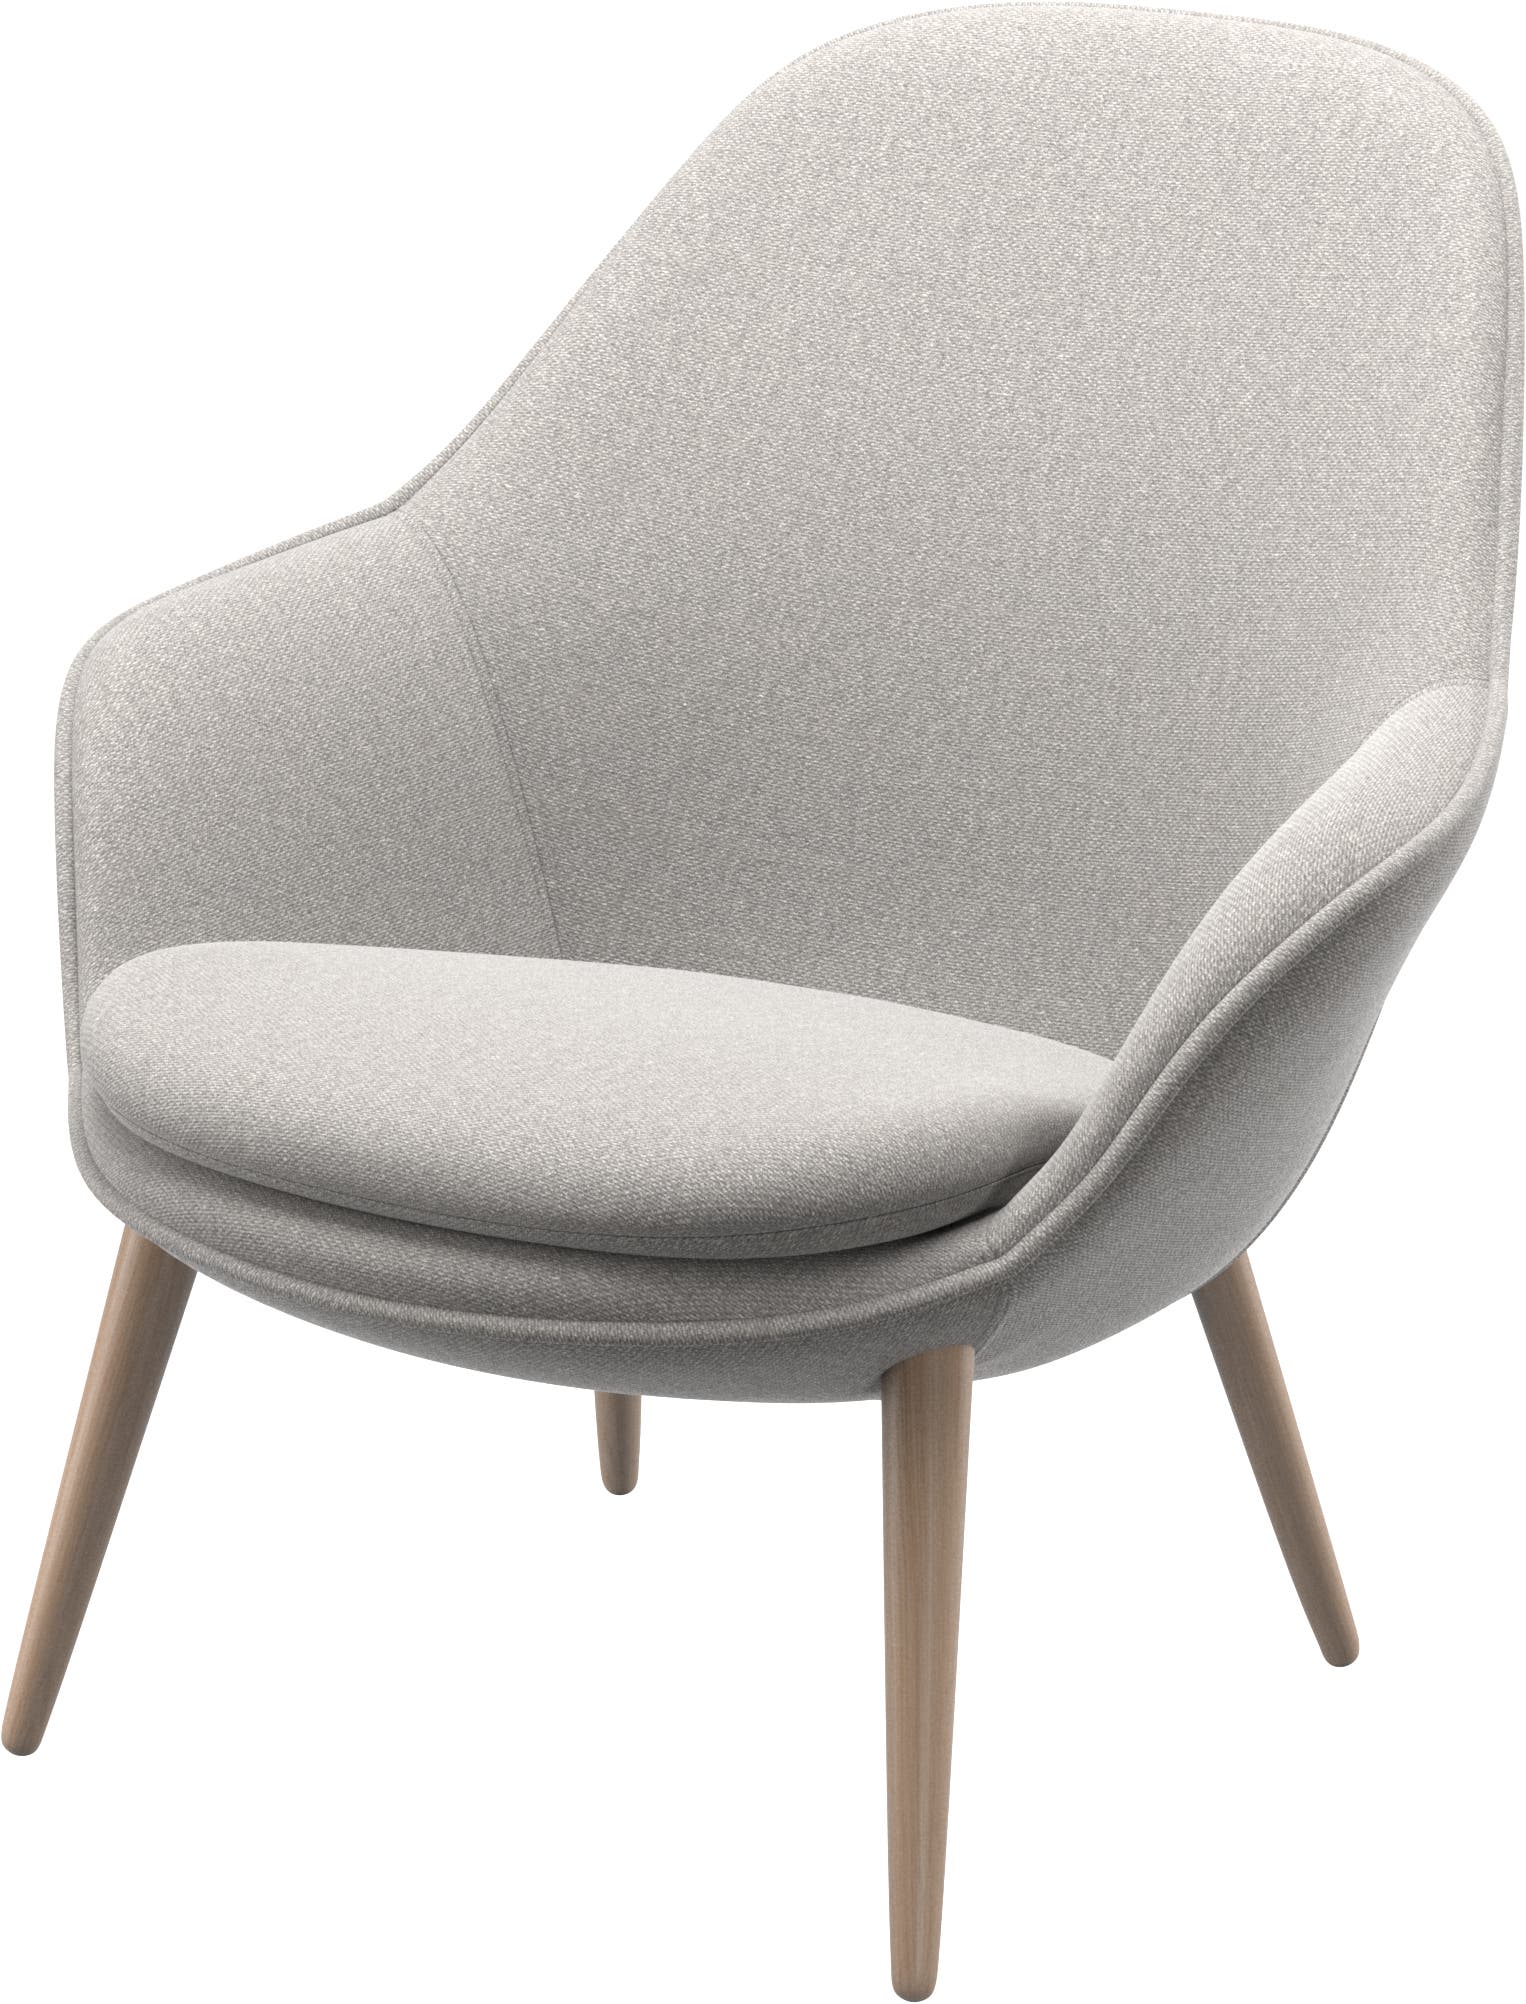 Adelaide living chair